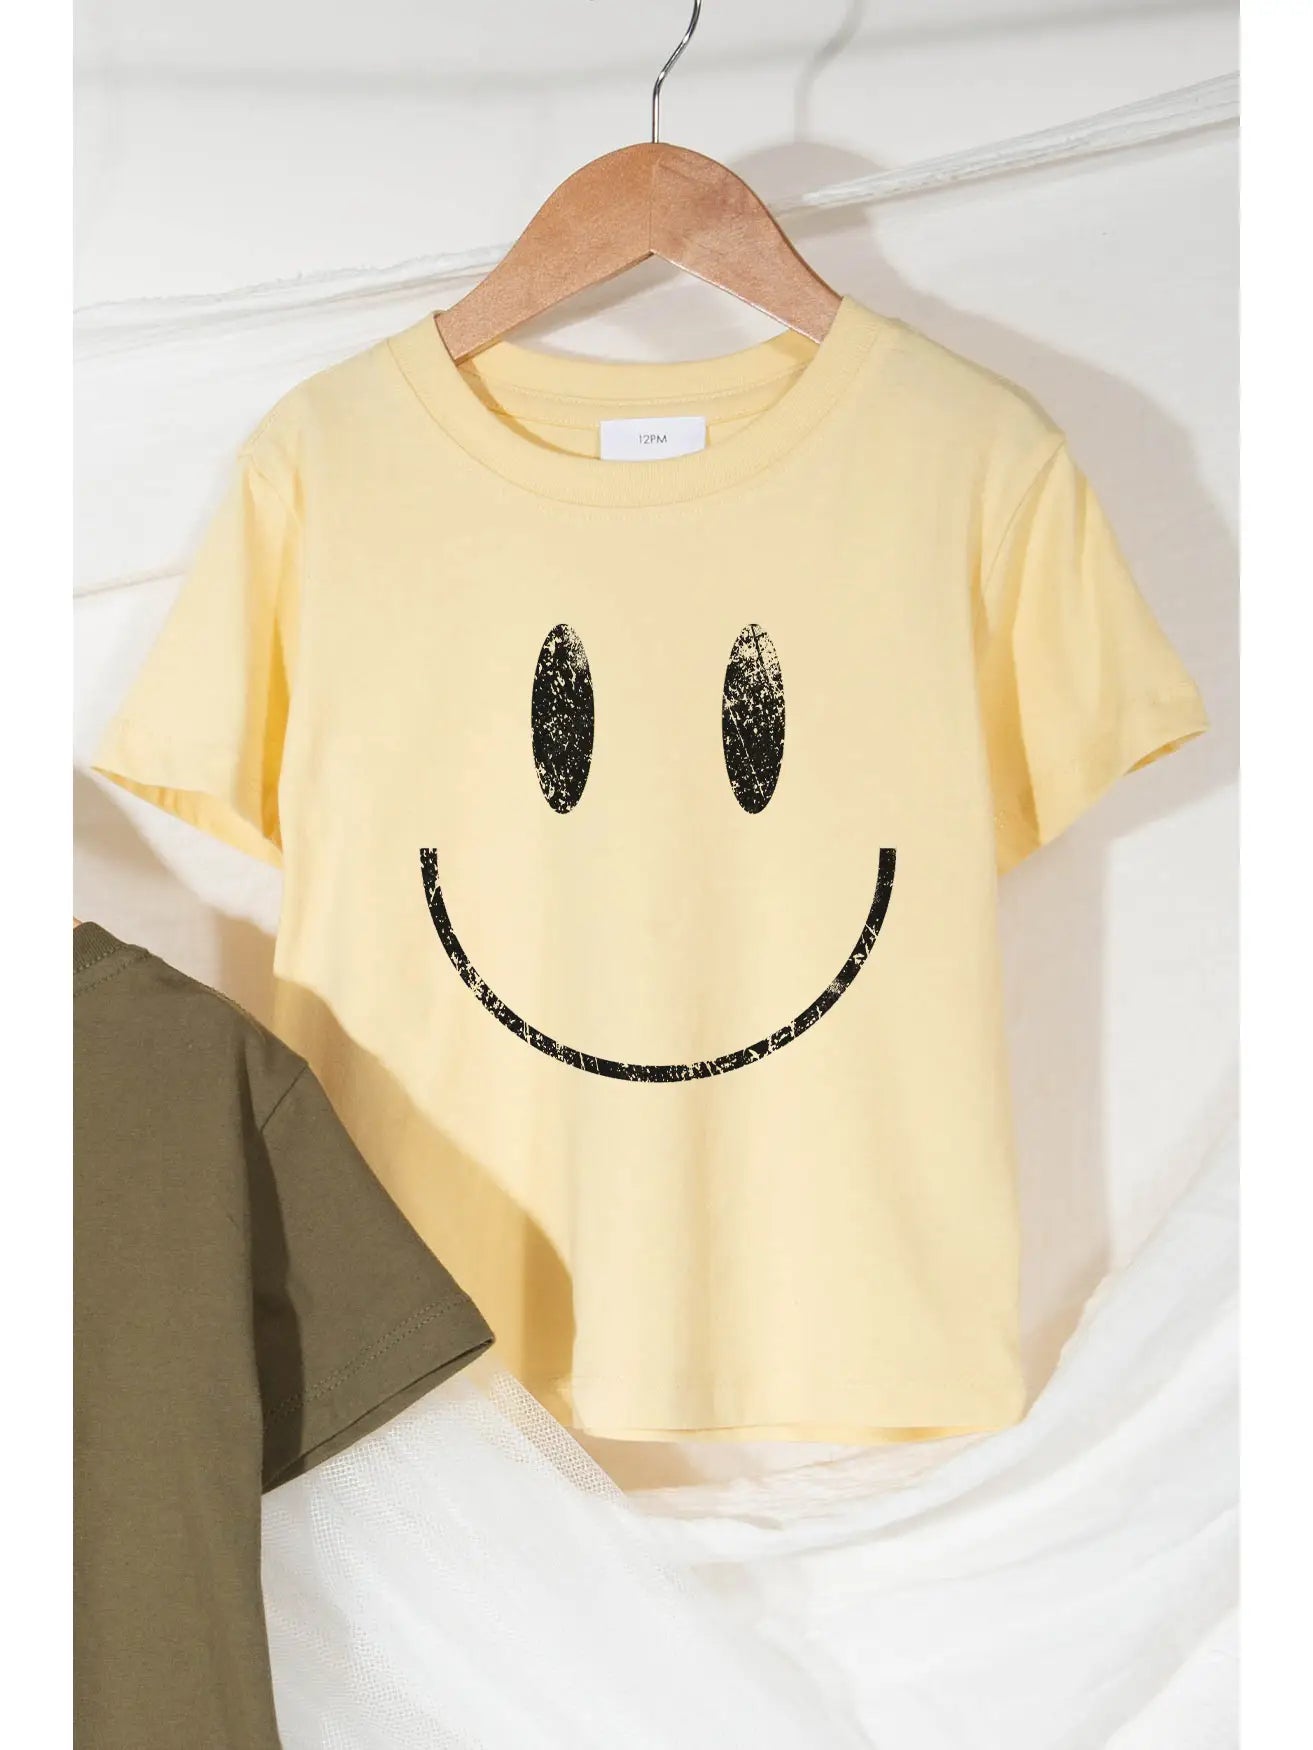 ppeppi - Smile Graphic Tee